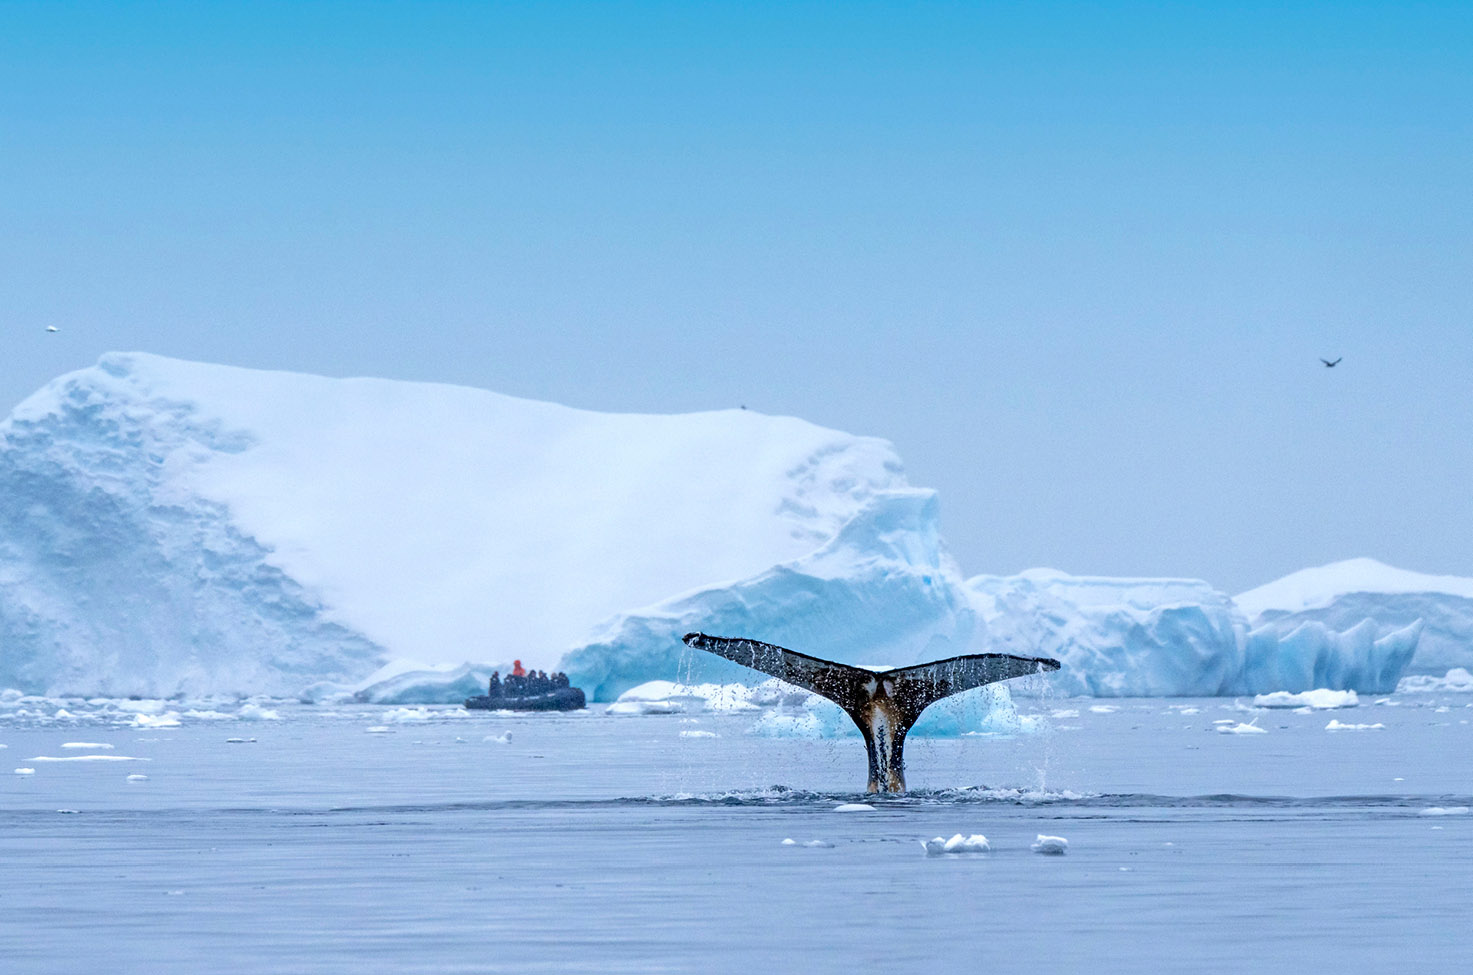 Whale tail breaching the surface of the water in Antarctica